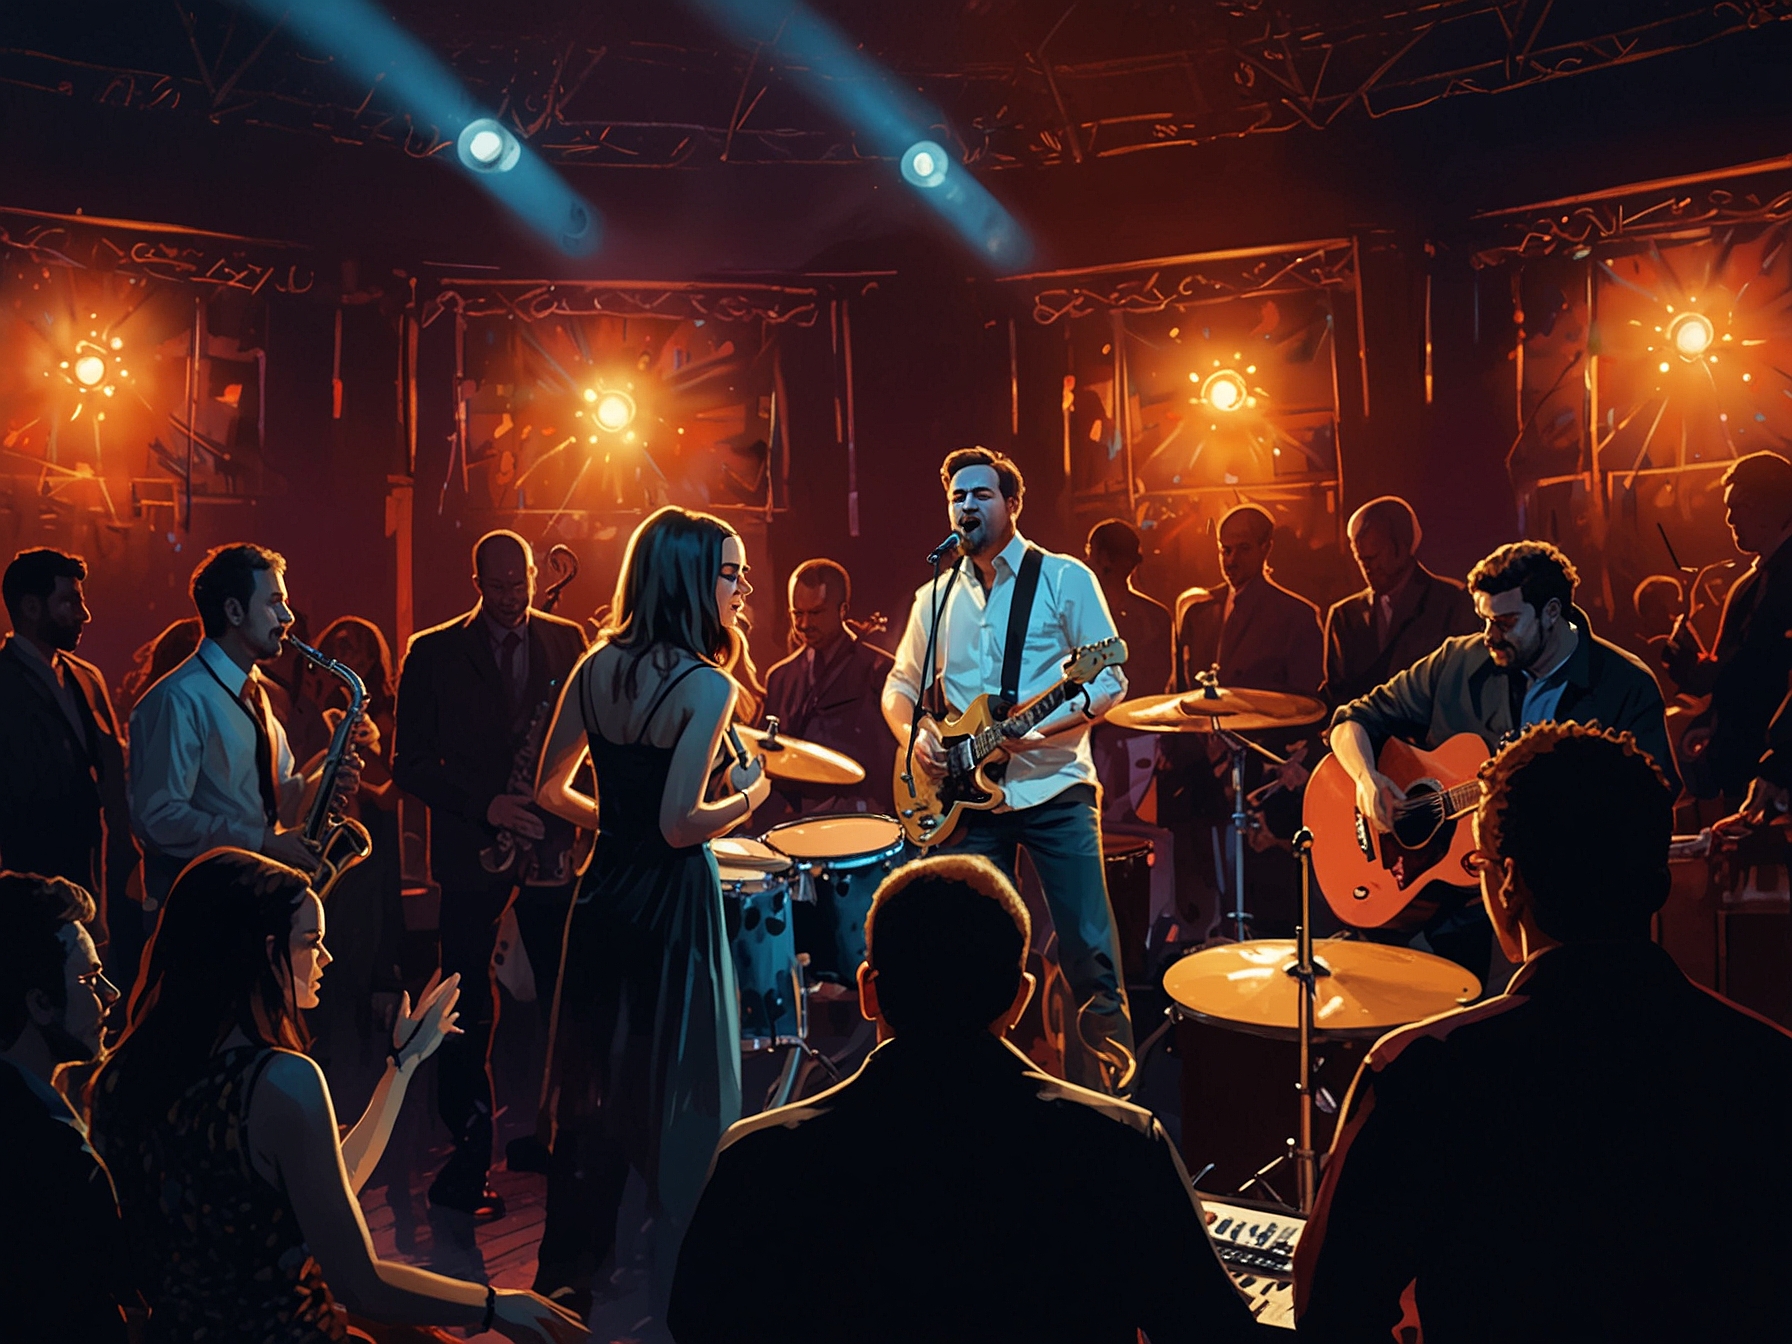 SuperJazzClub performing live at a UK festival, with vibrant lighting and the band members passionately playing their instruments, capturing the essence of their genre-blending music.